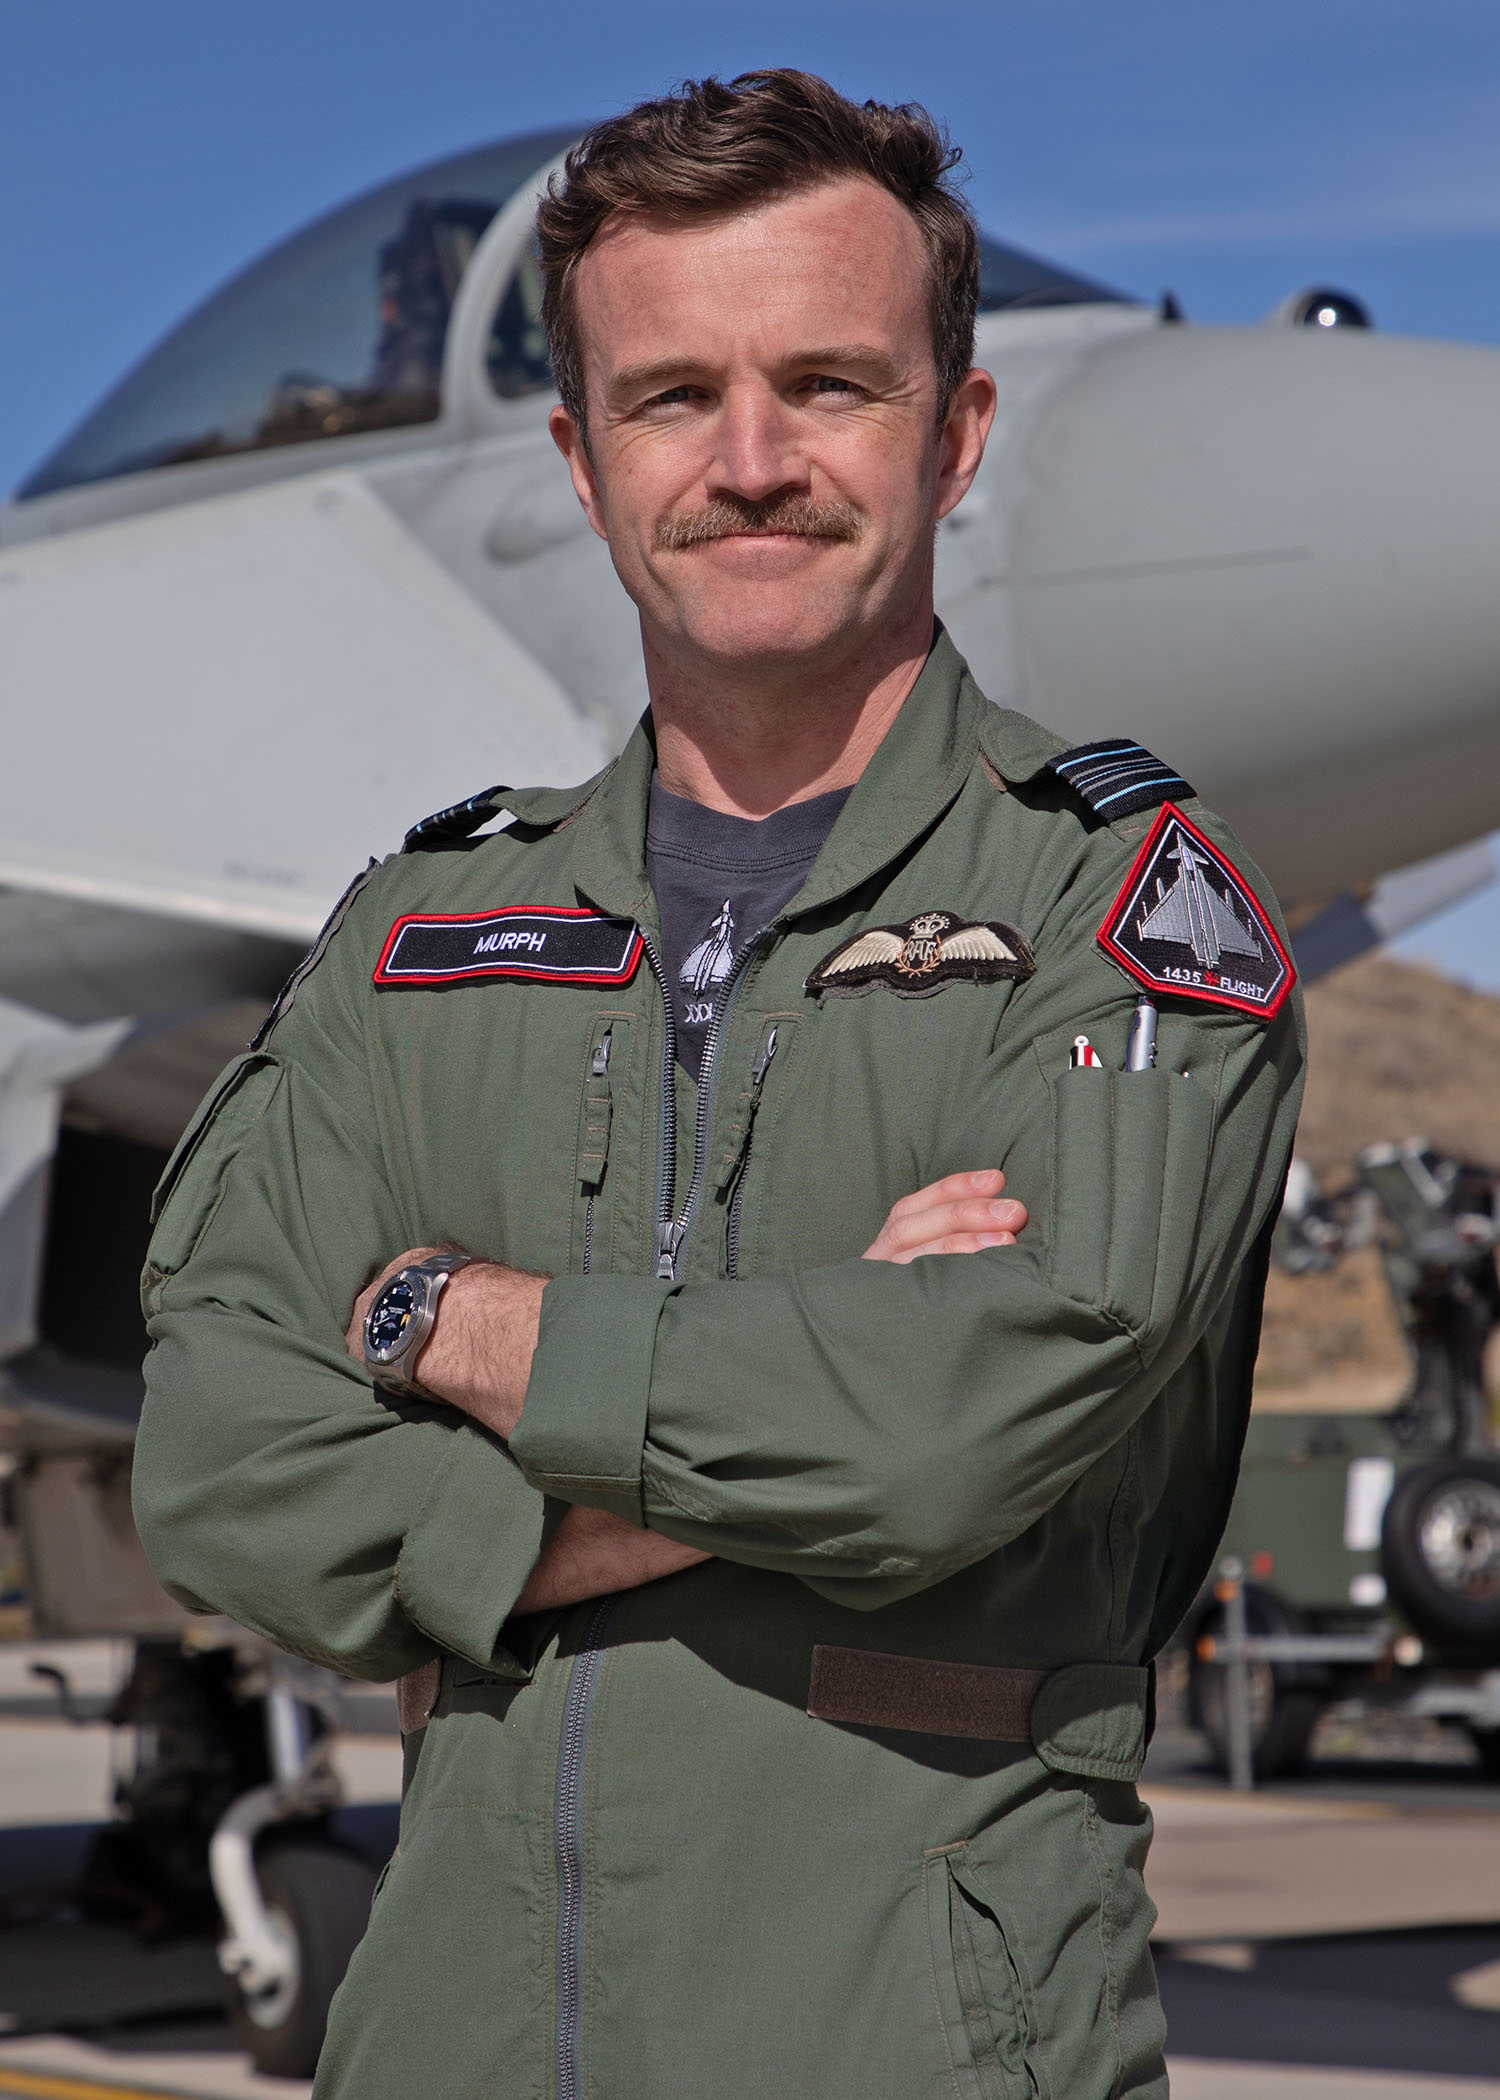 Image shows RAF aviator standing by a RAF Typhoon on the airfield.